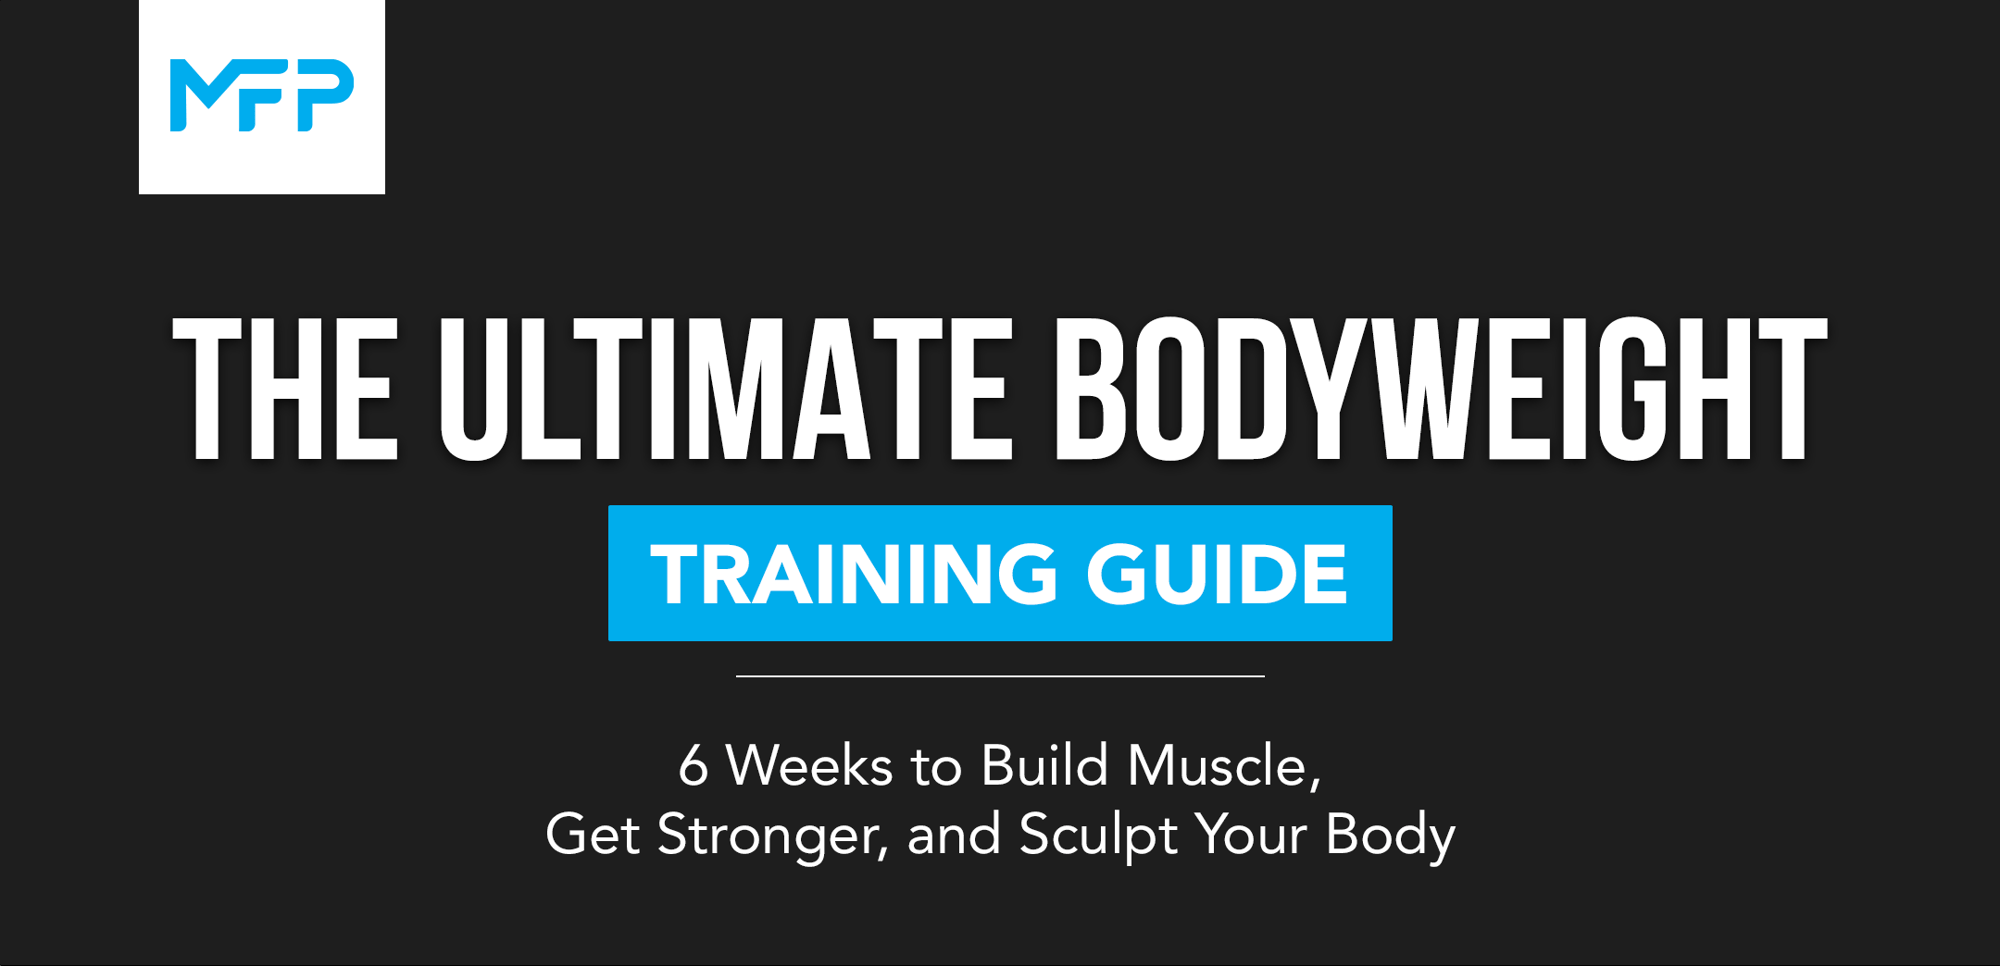 Ultimate Bodyweight Training Guide